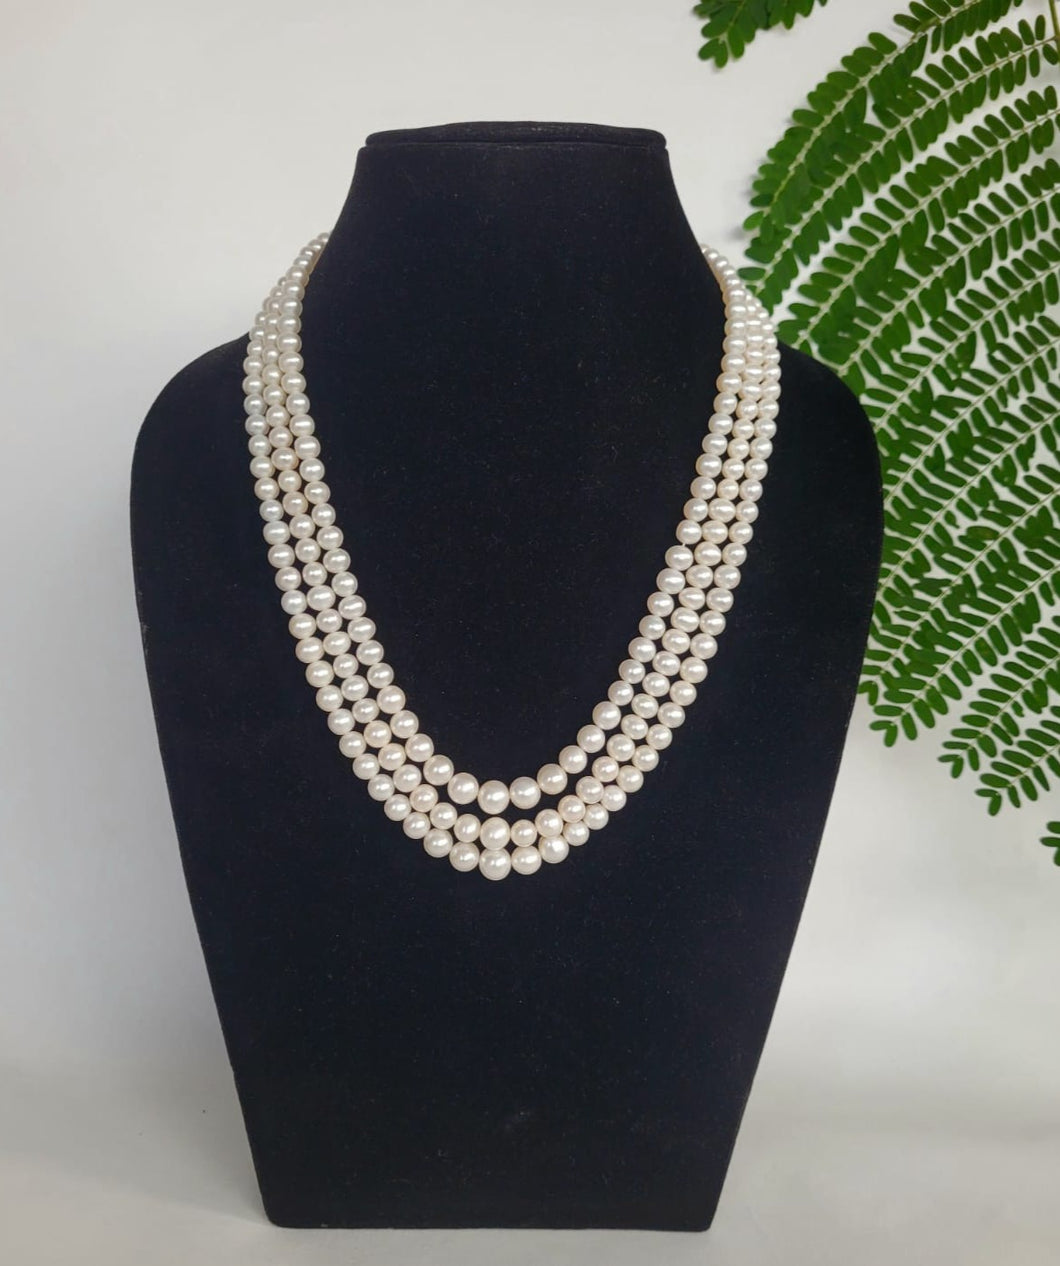 Gemzlane Real Pearls Triple Layered Necklace